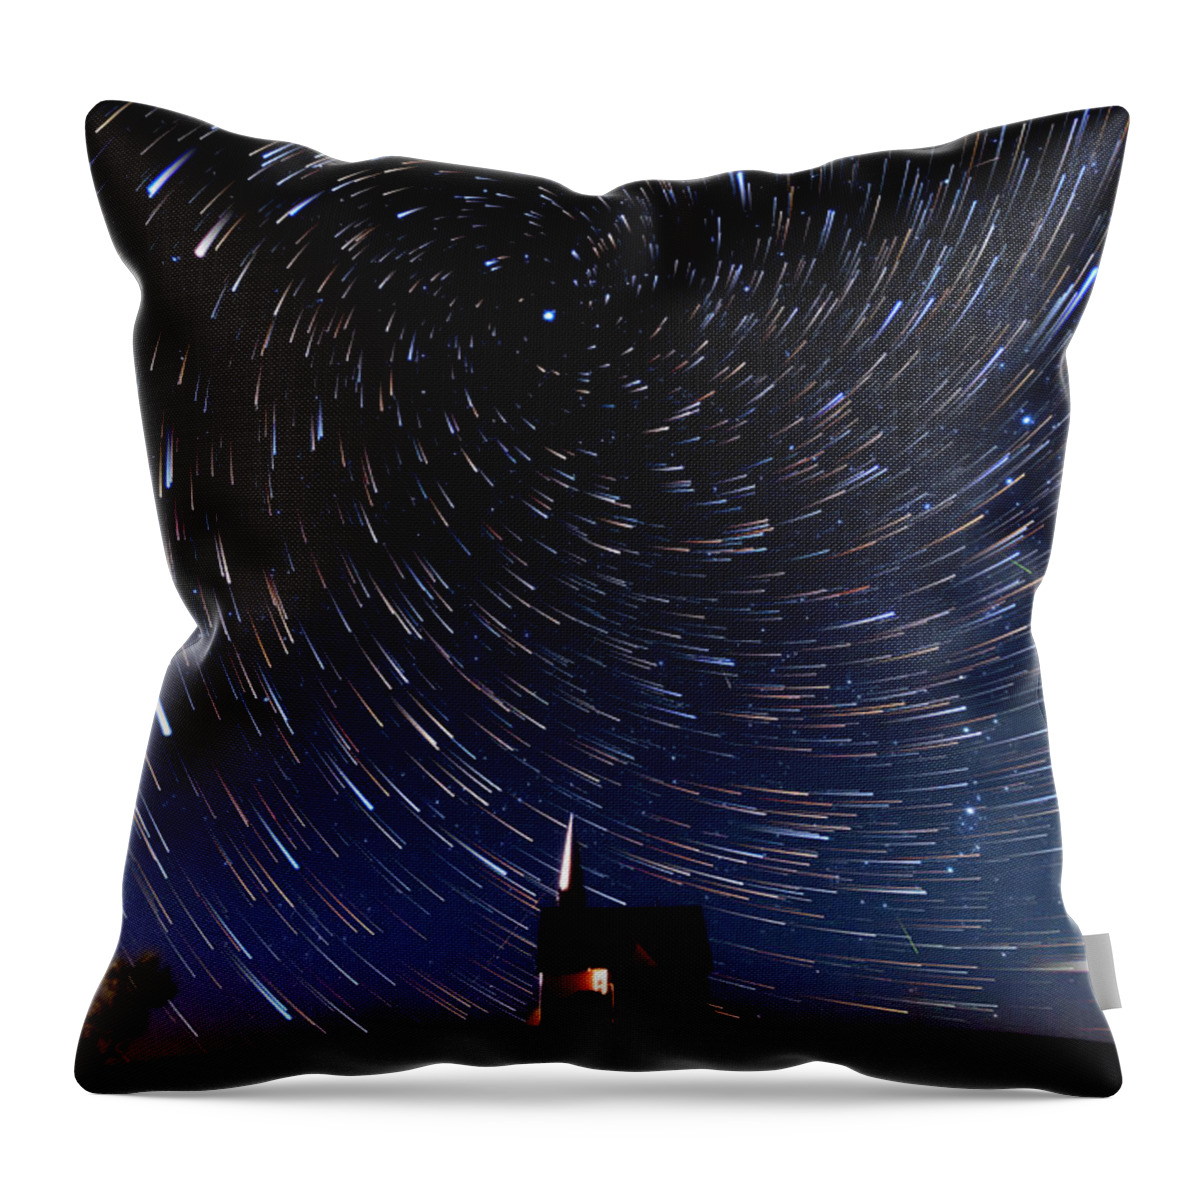 Vortex Throw Pillow featuring the photograph The Starry Night by Yoshiki Nakamura